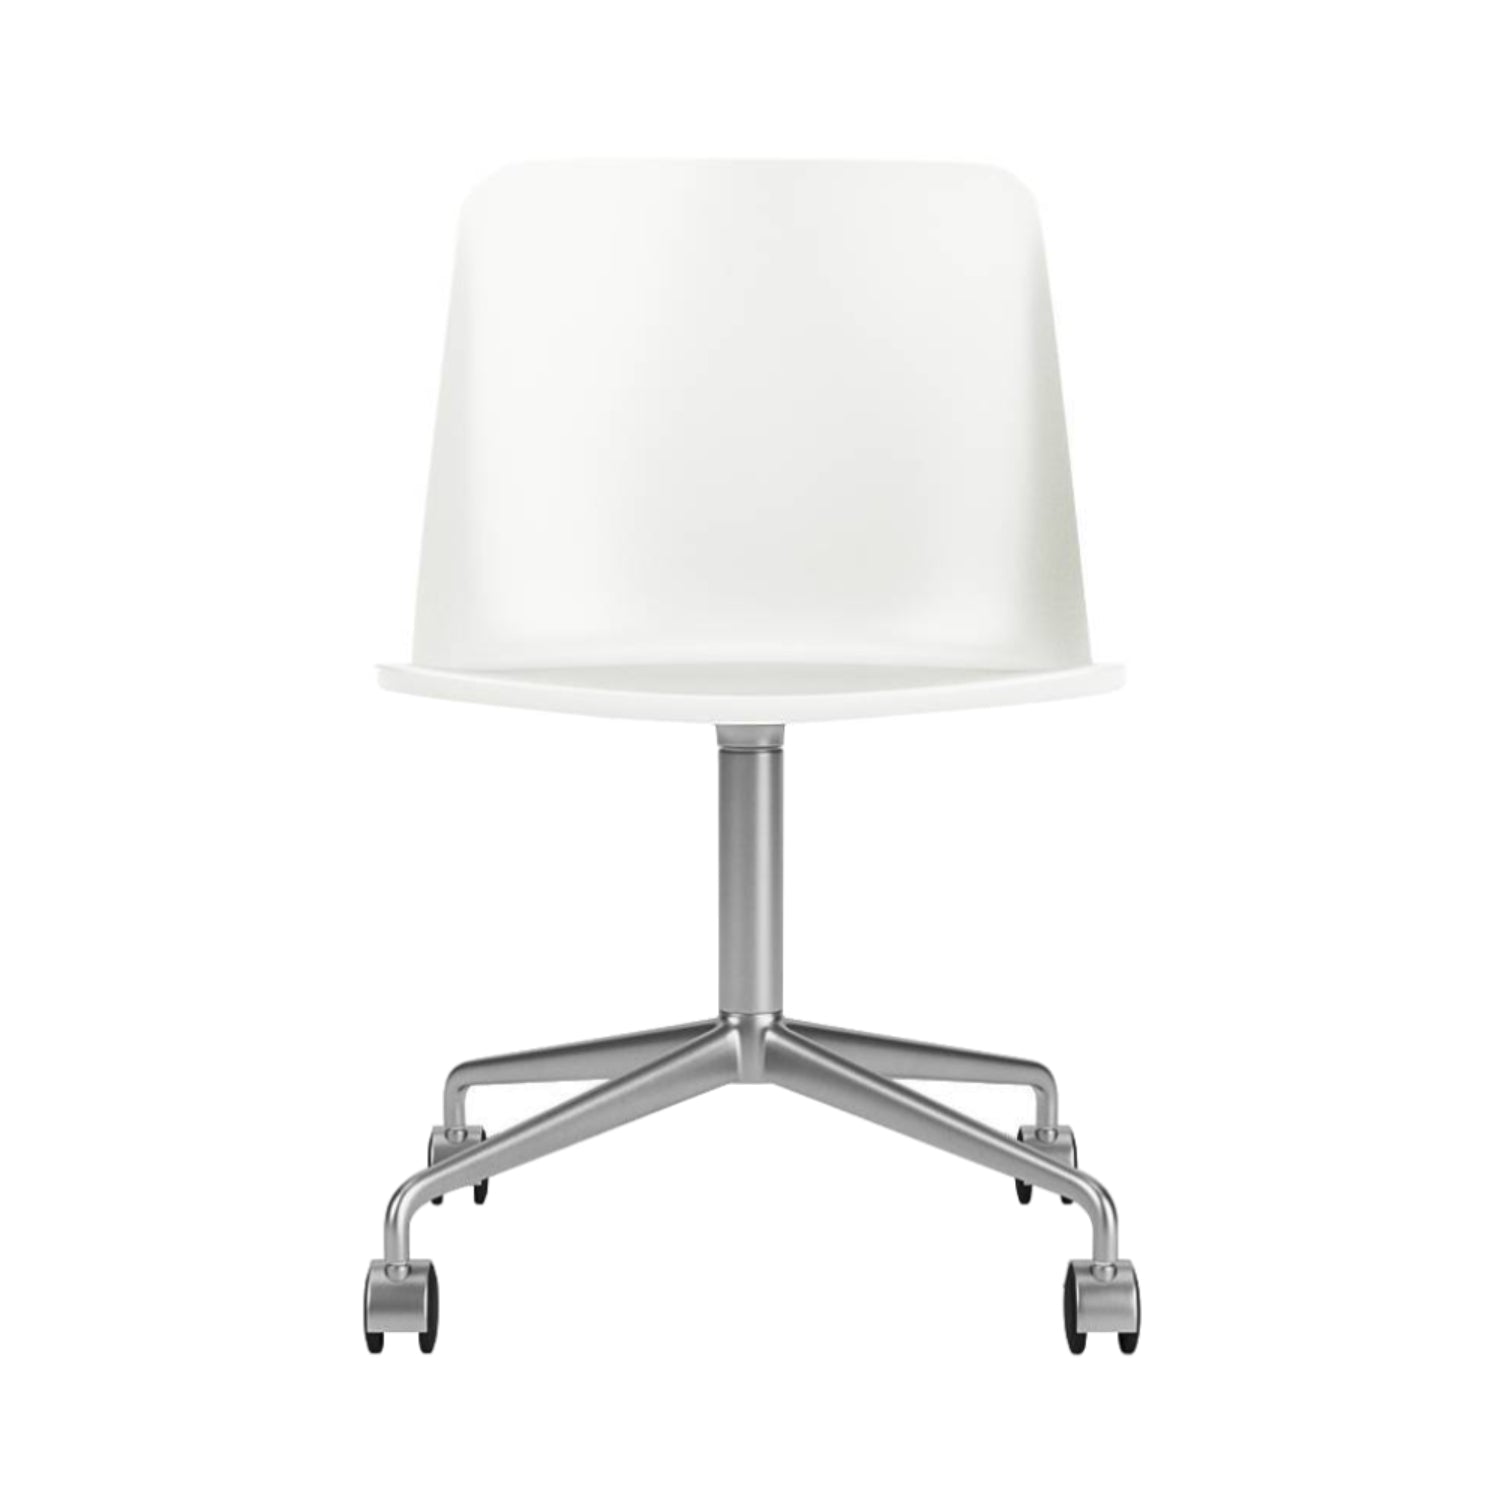 Rely Chair HW21: White + Polished Aluminum